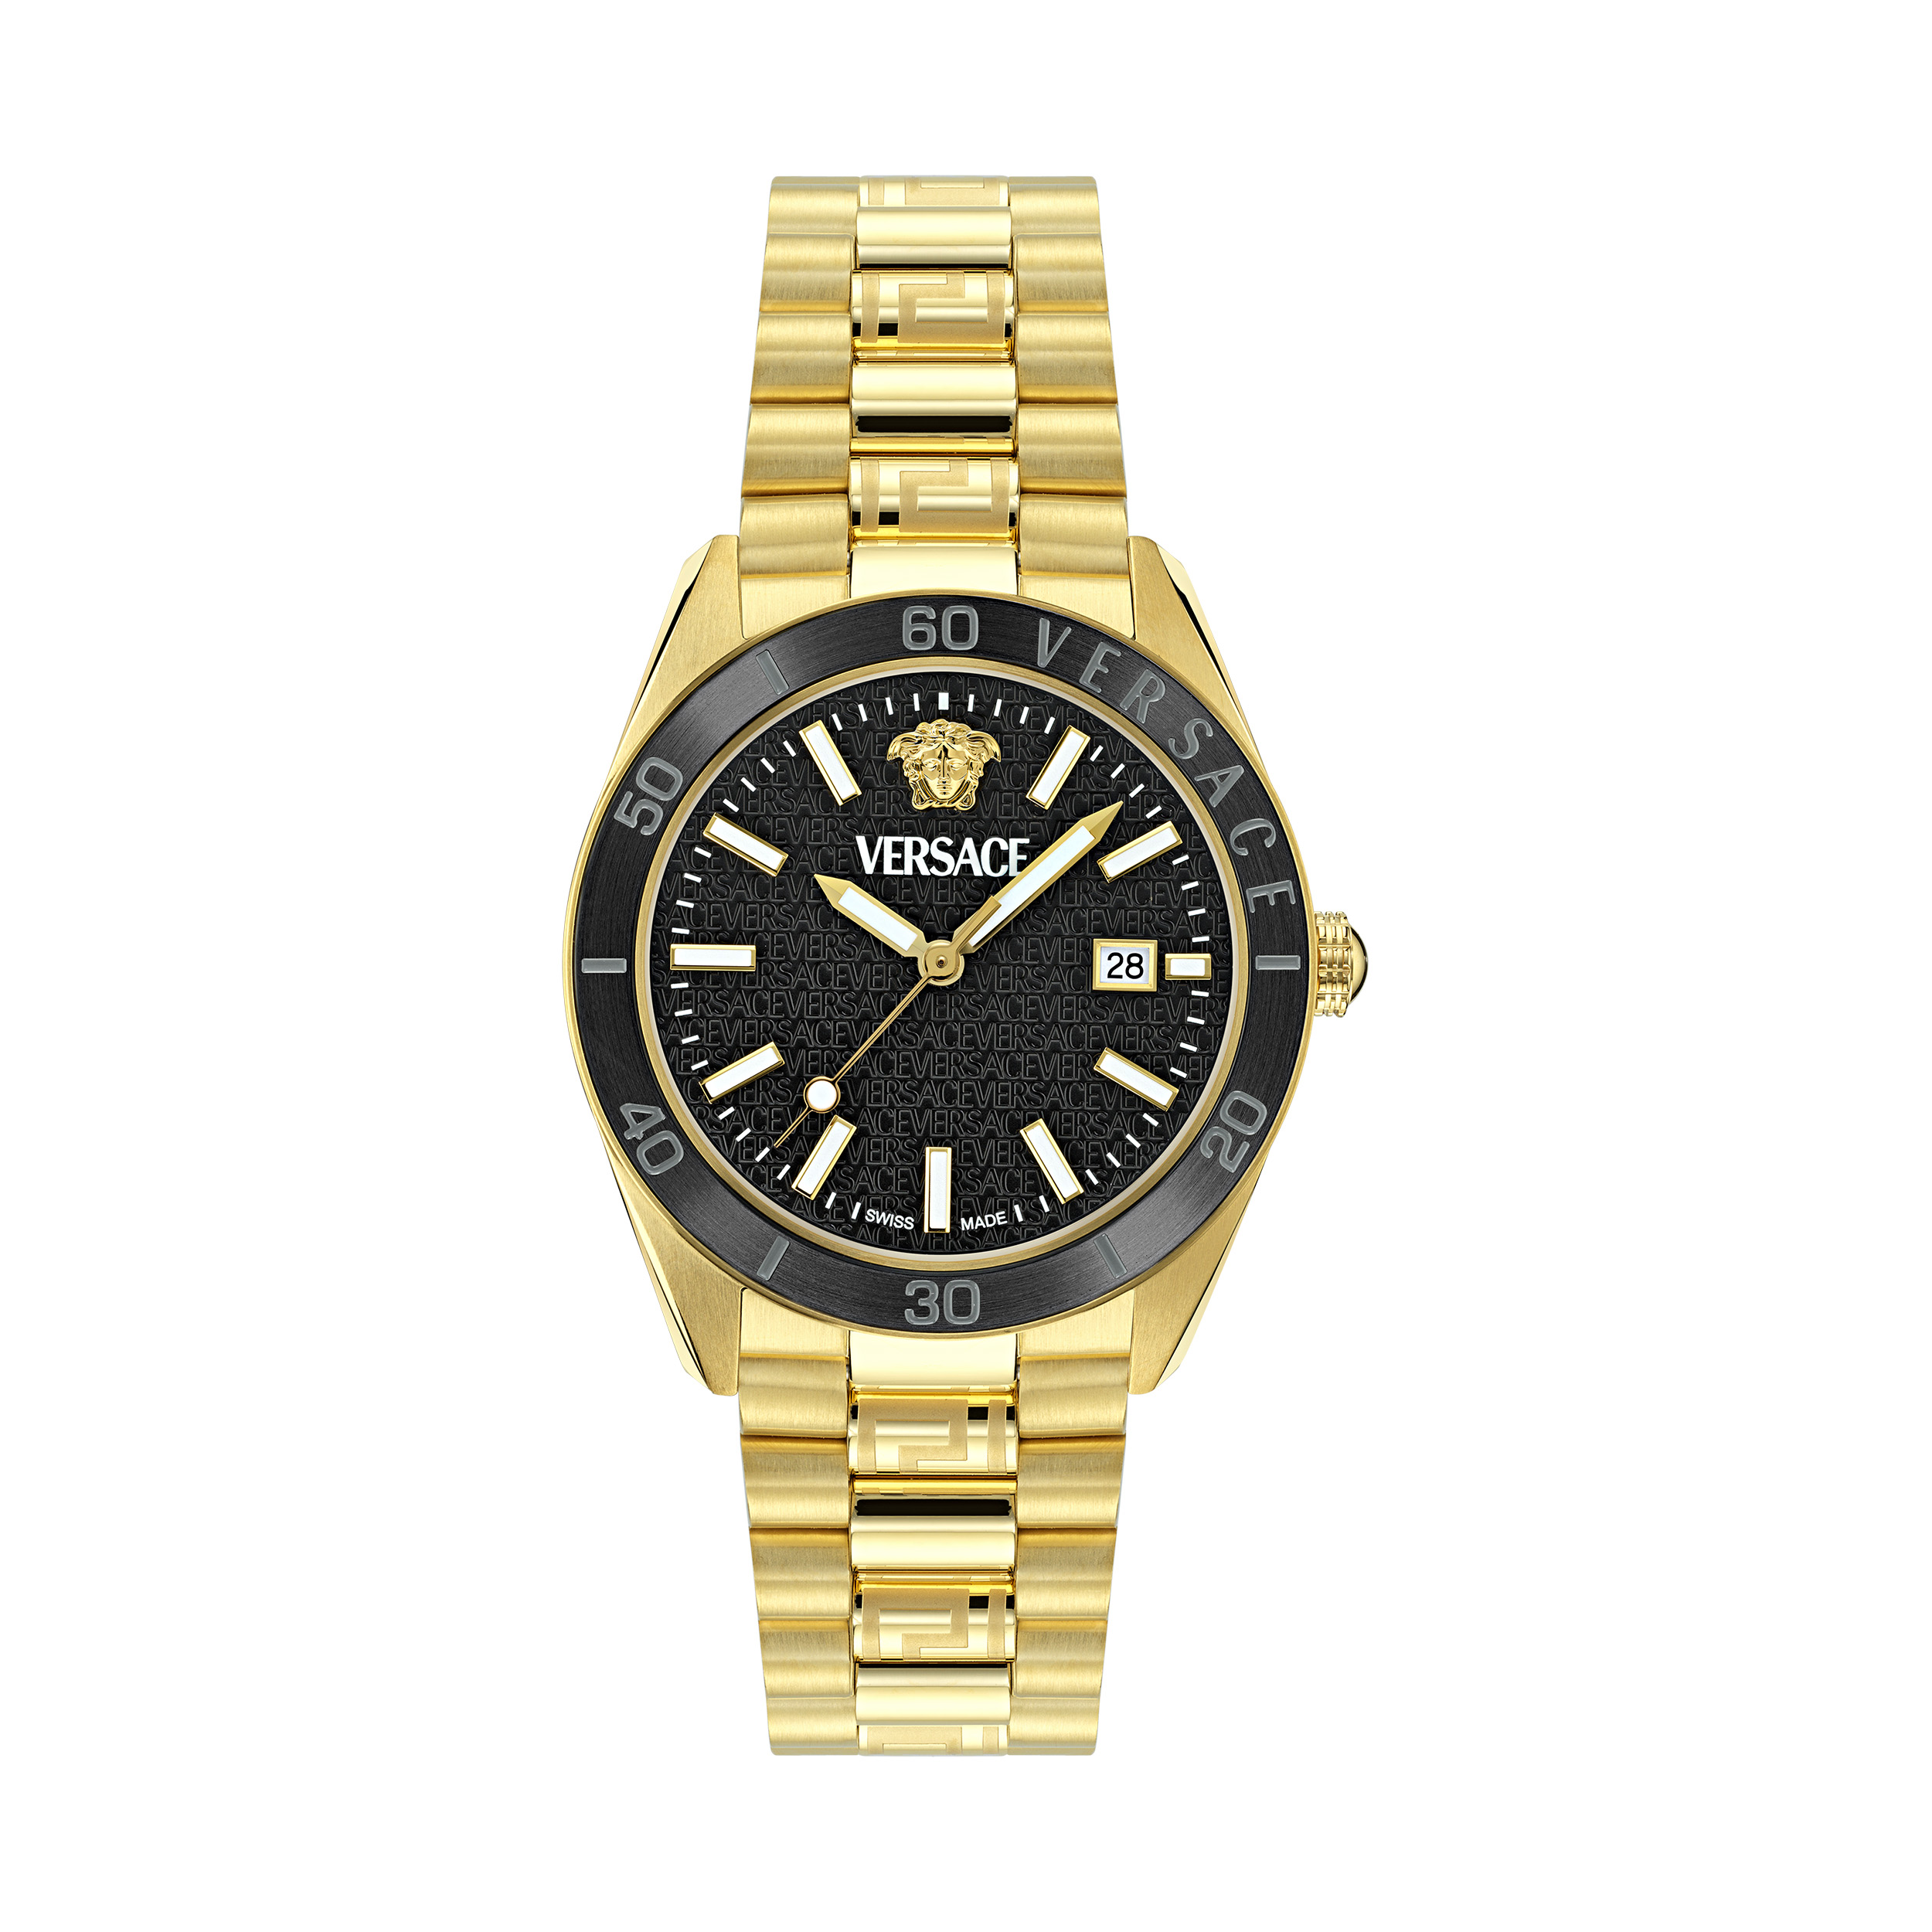 Pre-owned Versace Gold Mens Analogue Watch V-dome Ve8e00624